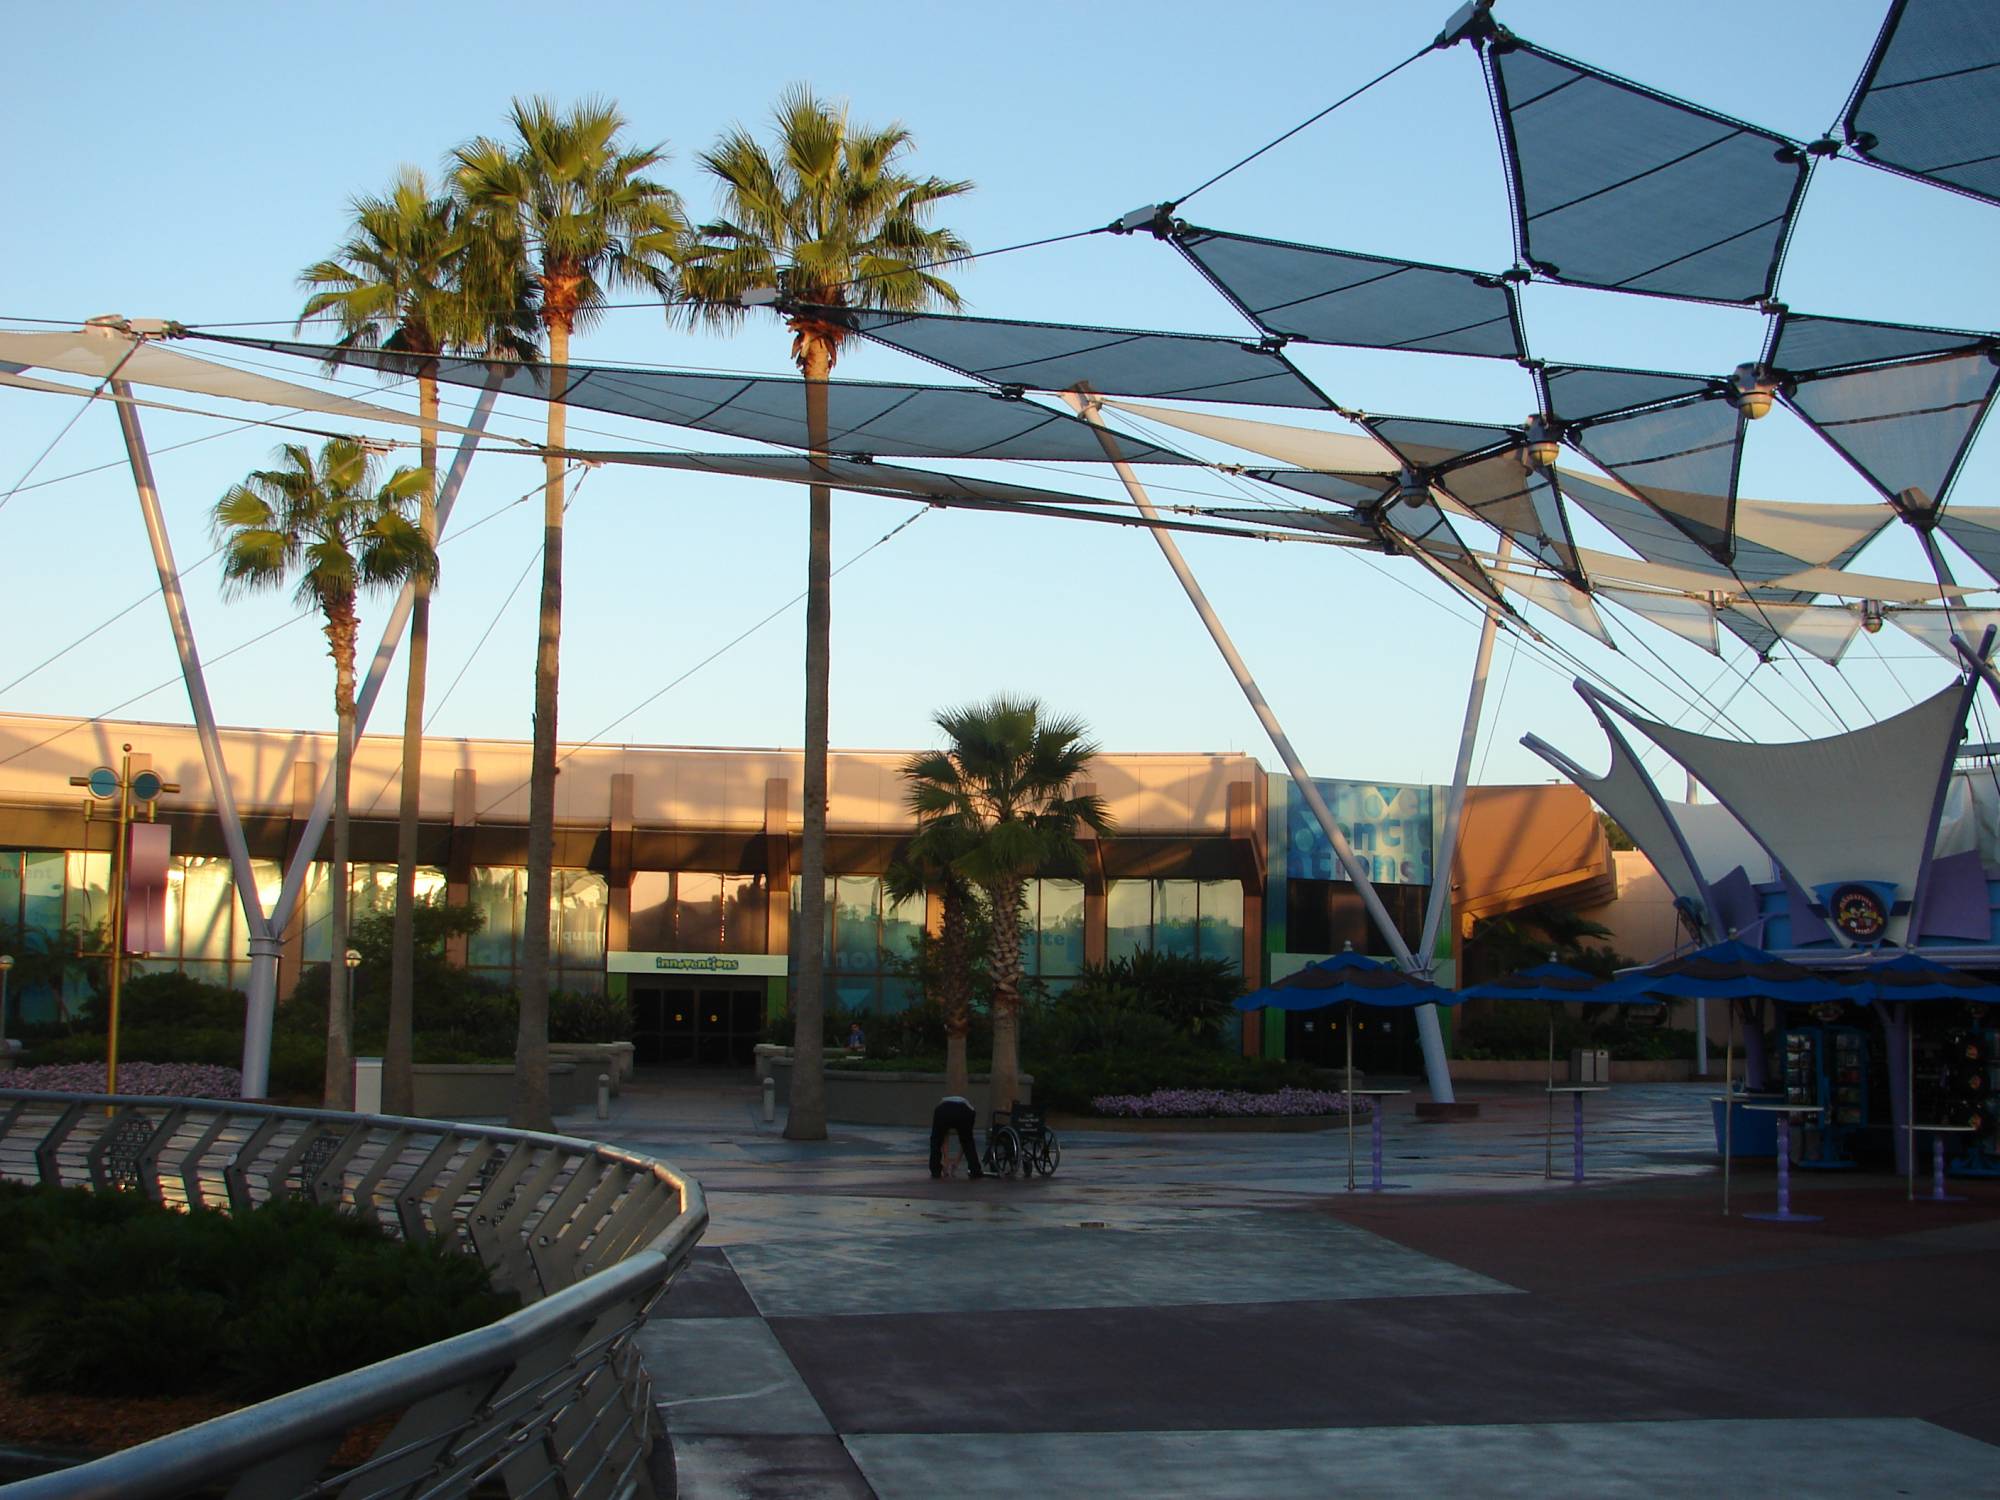 A quiet morning at Innoventions